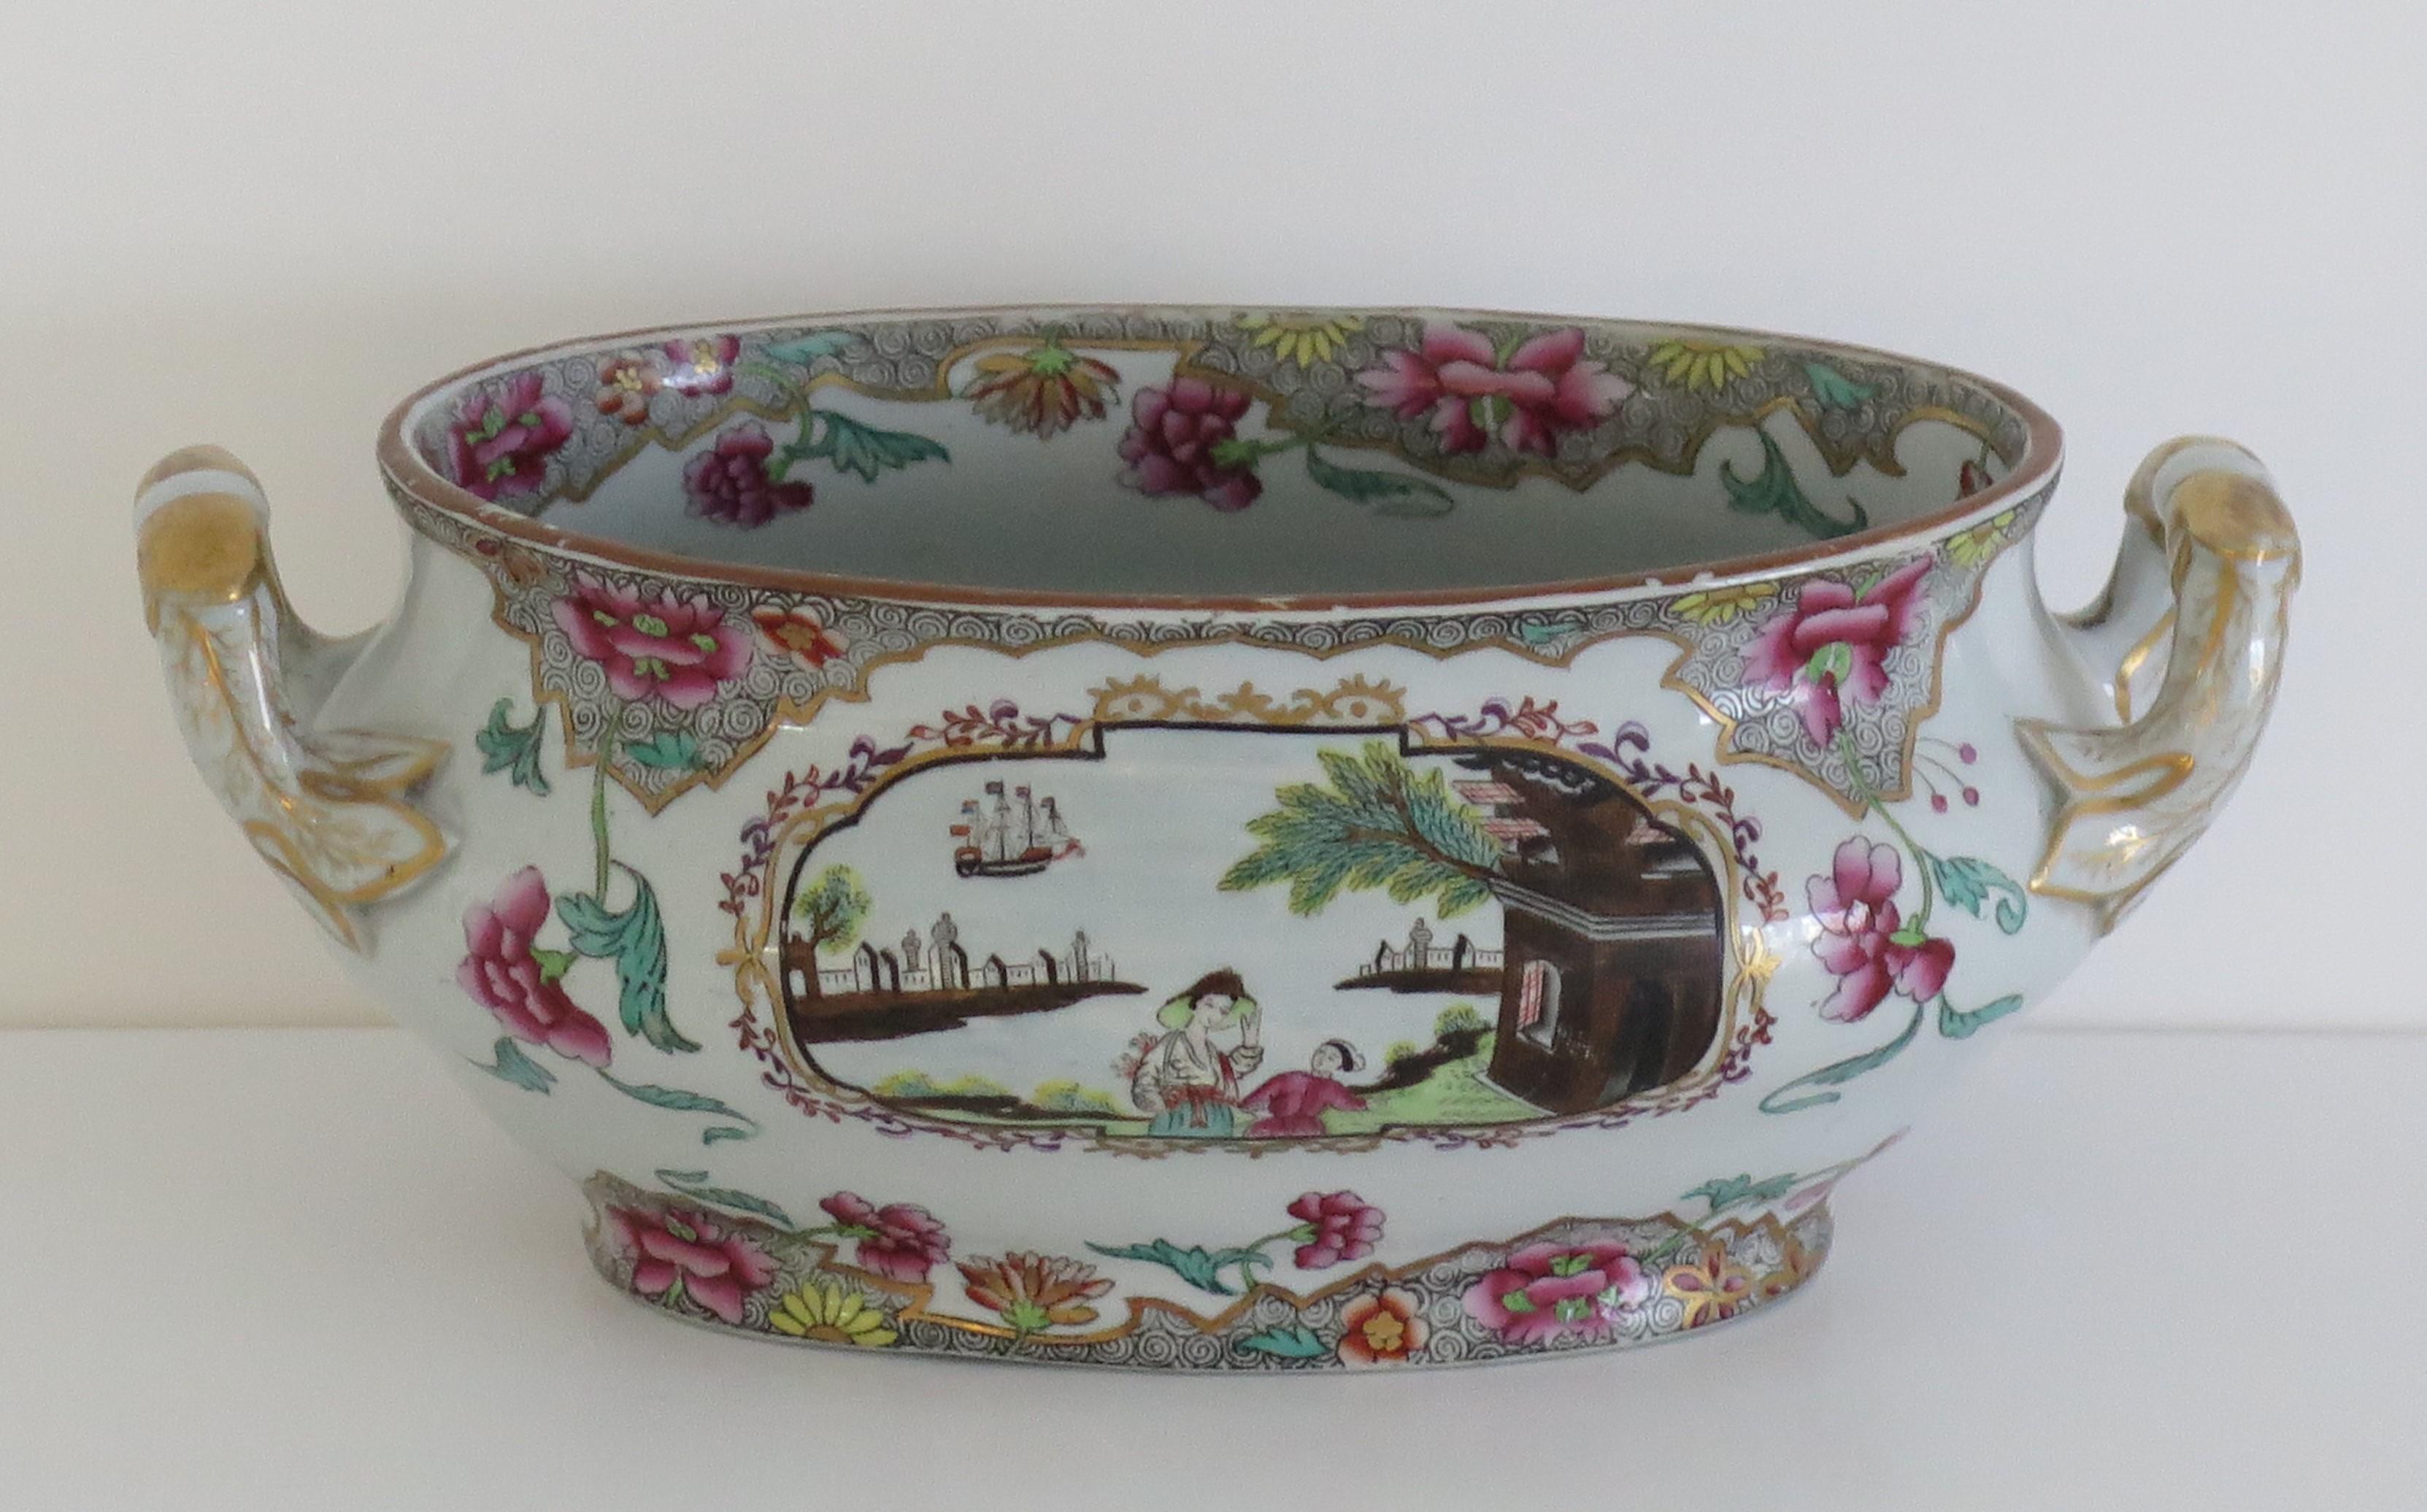 This is a very good sauce tureen made of ironstone (Spode's Stone China) in the Ship Pattern, No 3067, produced by the English, Spode factory early in the 19th century, George 111rd Period.

The piece is well potted with two side handles.

The